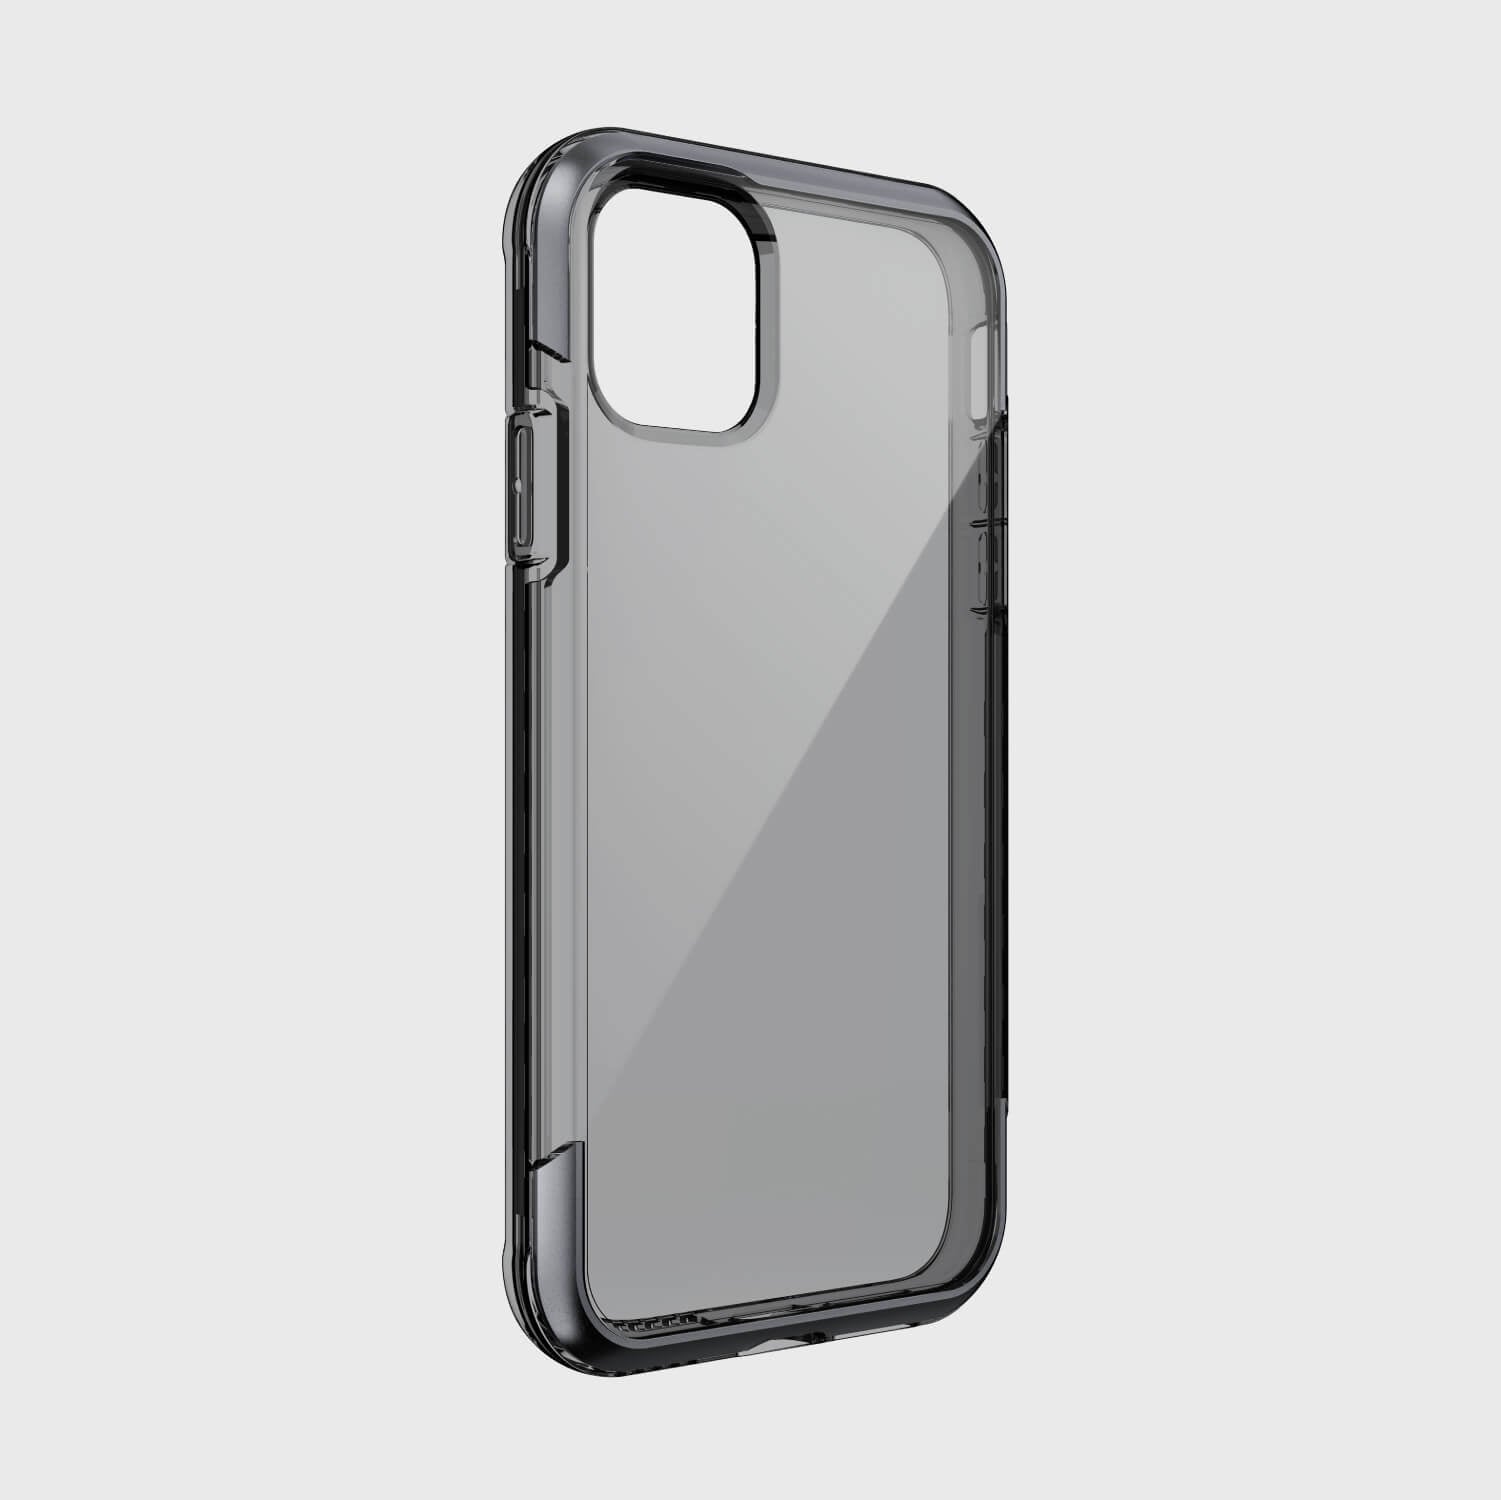 The back view of the Raptic iPhone 11 Pro Case - AIR with drop protection.